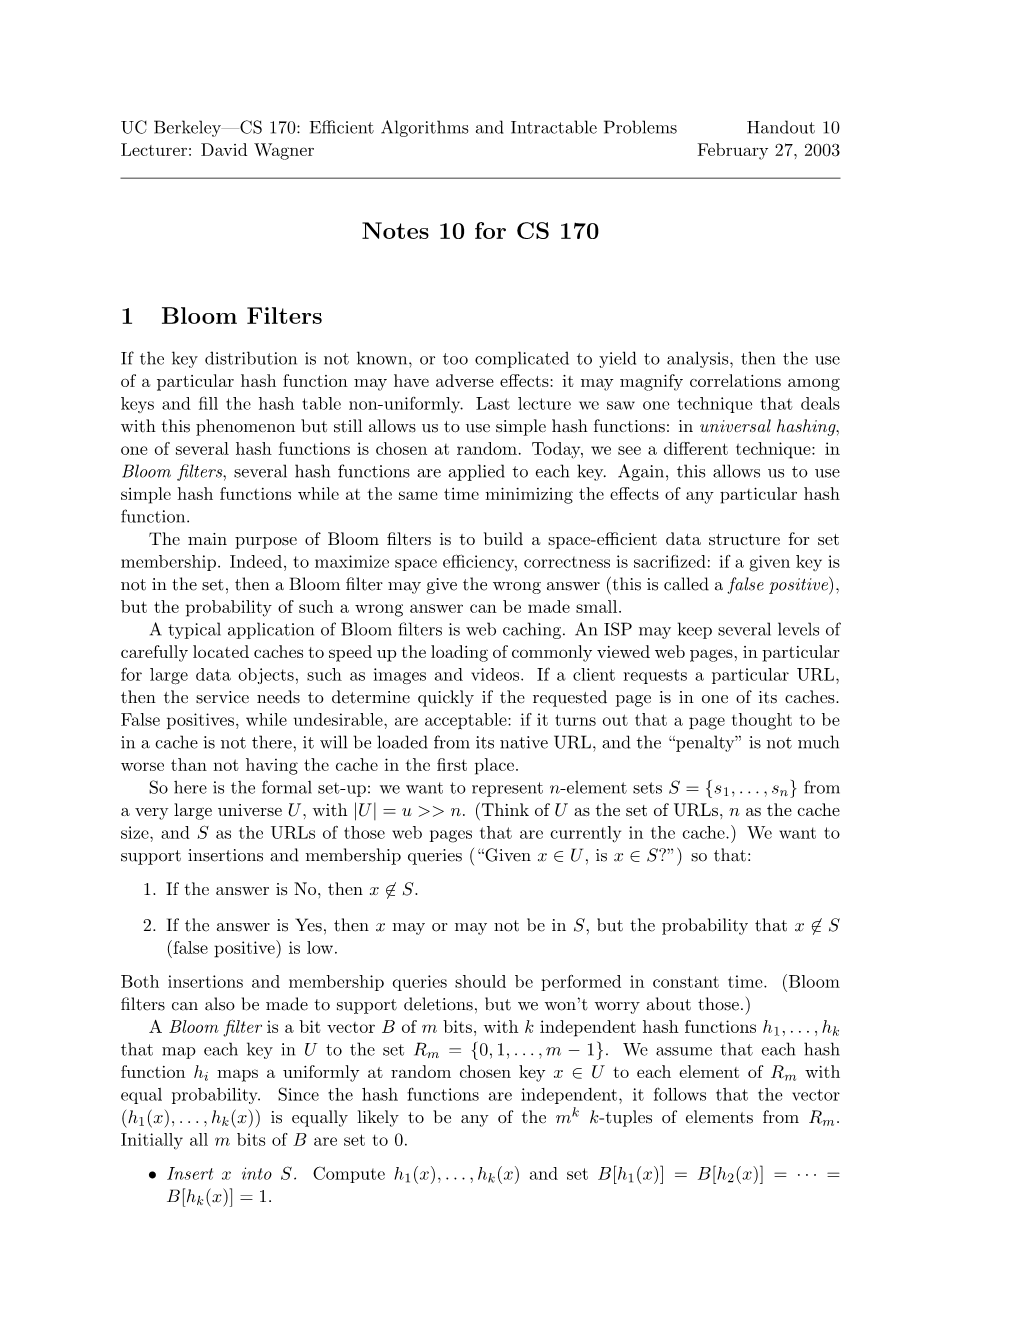 Notes 10 for CS 170 1 Bloom Filters